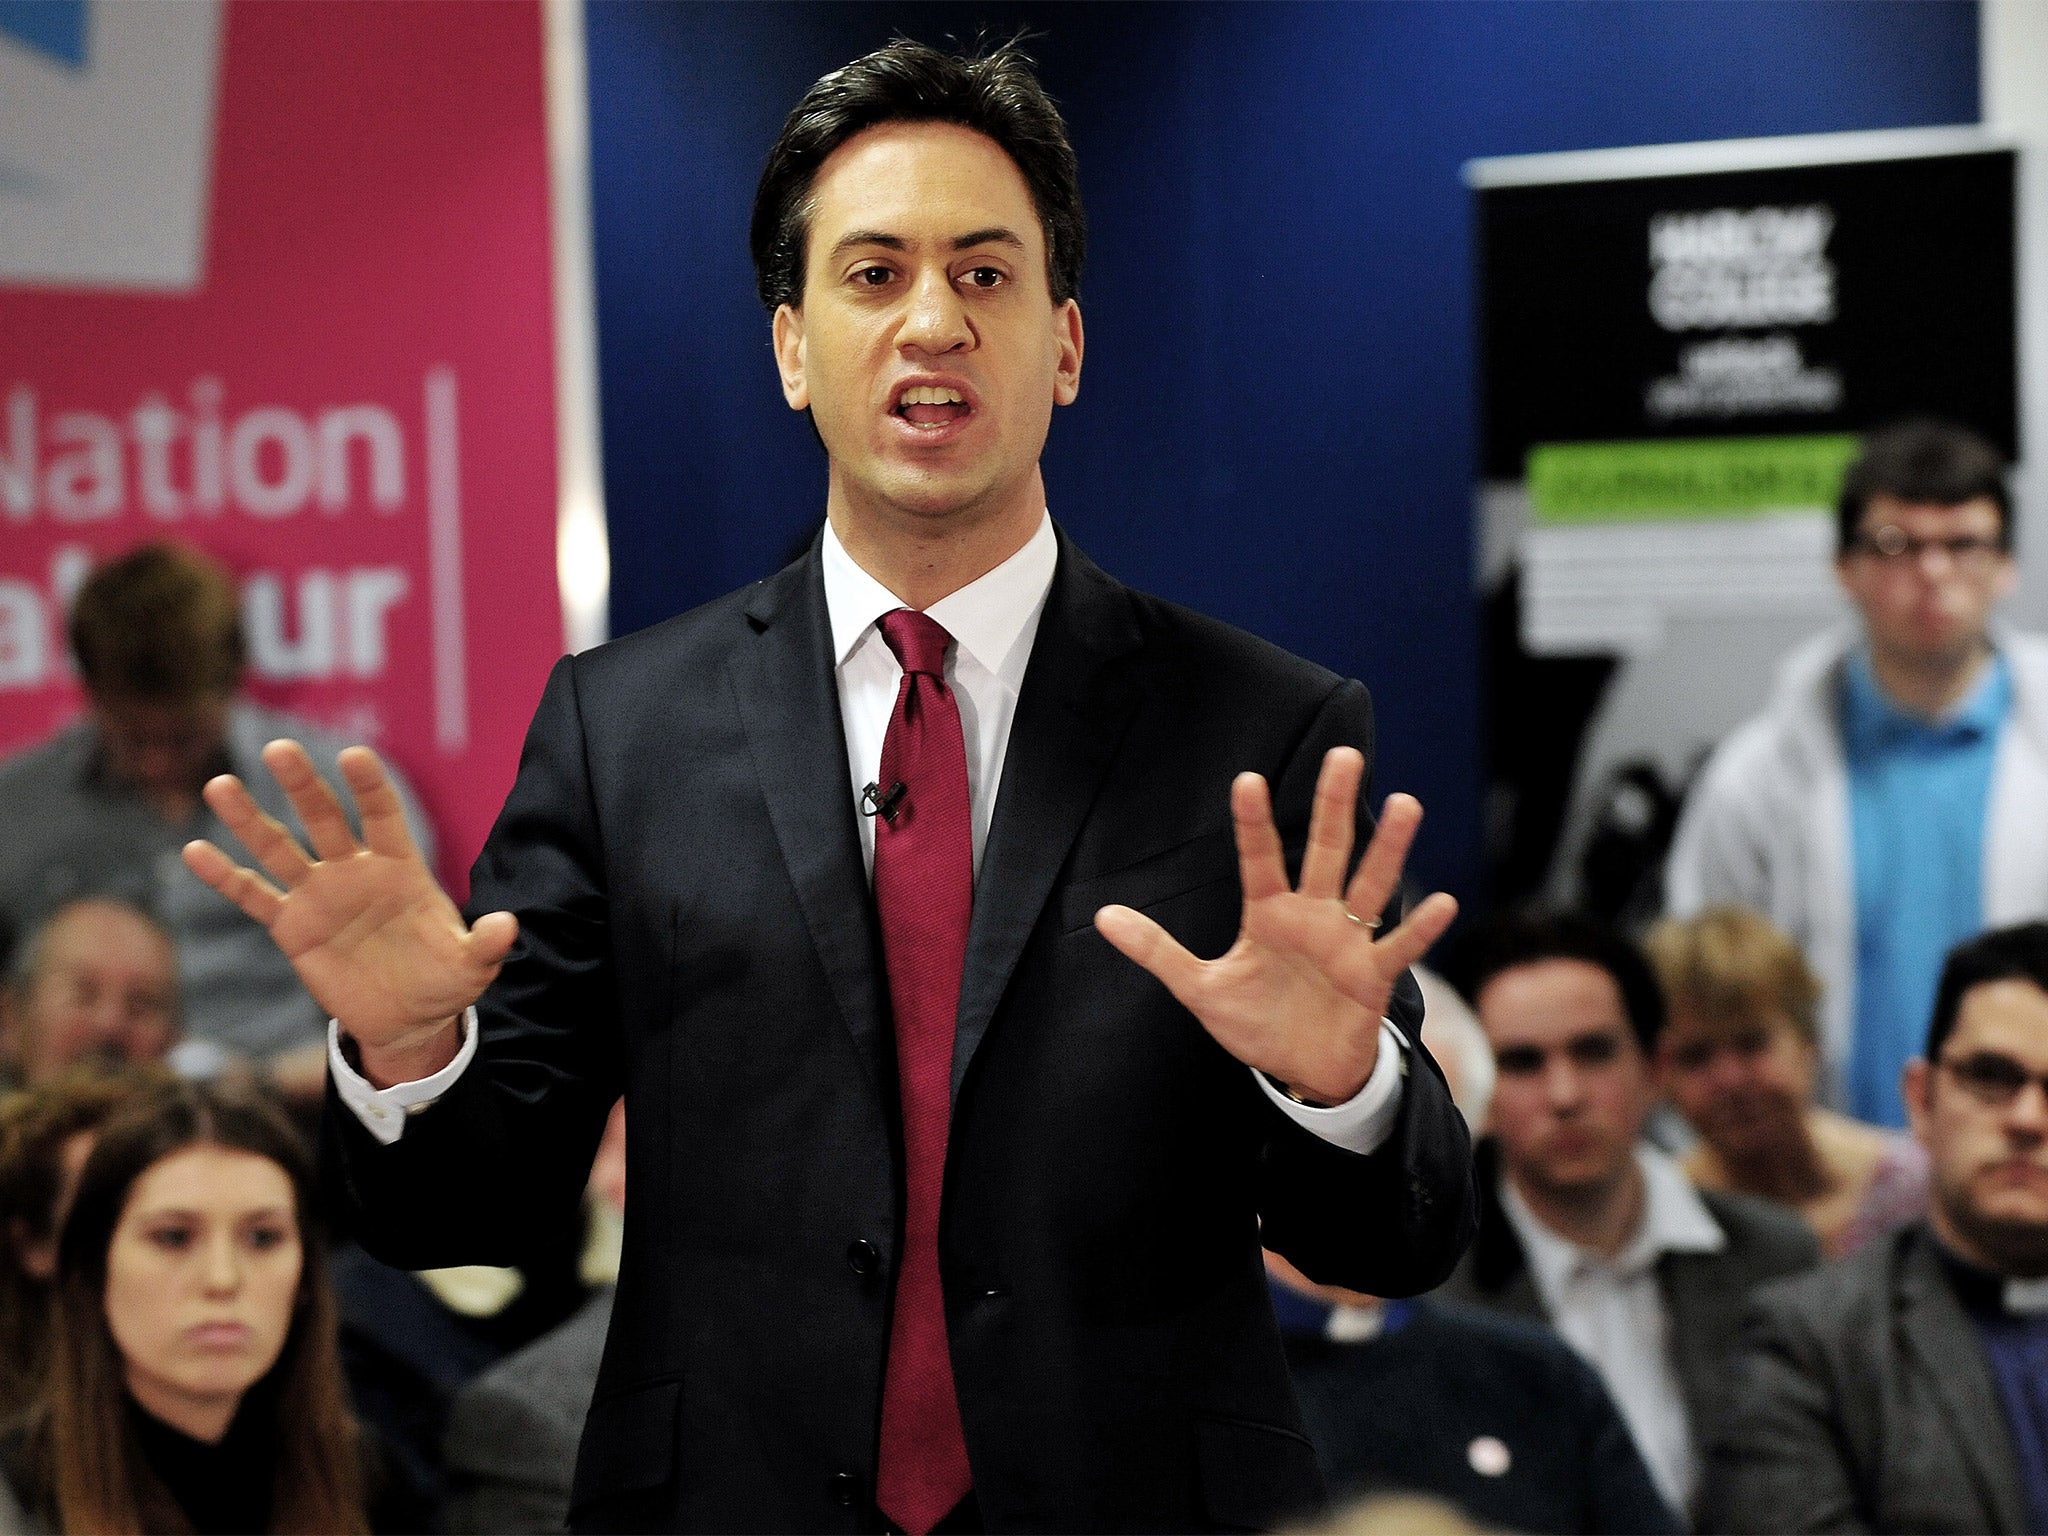 Ed Miliband on a visit to Harlow College with Harlow’s Labour parliamentary candidate Suzy Stride